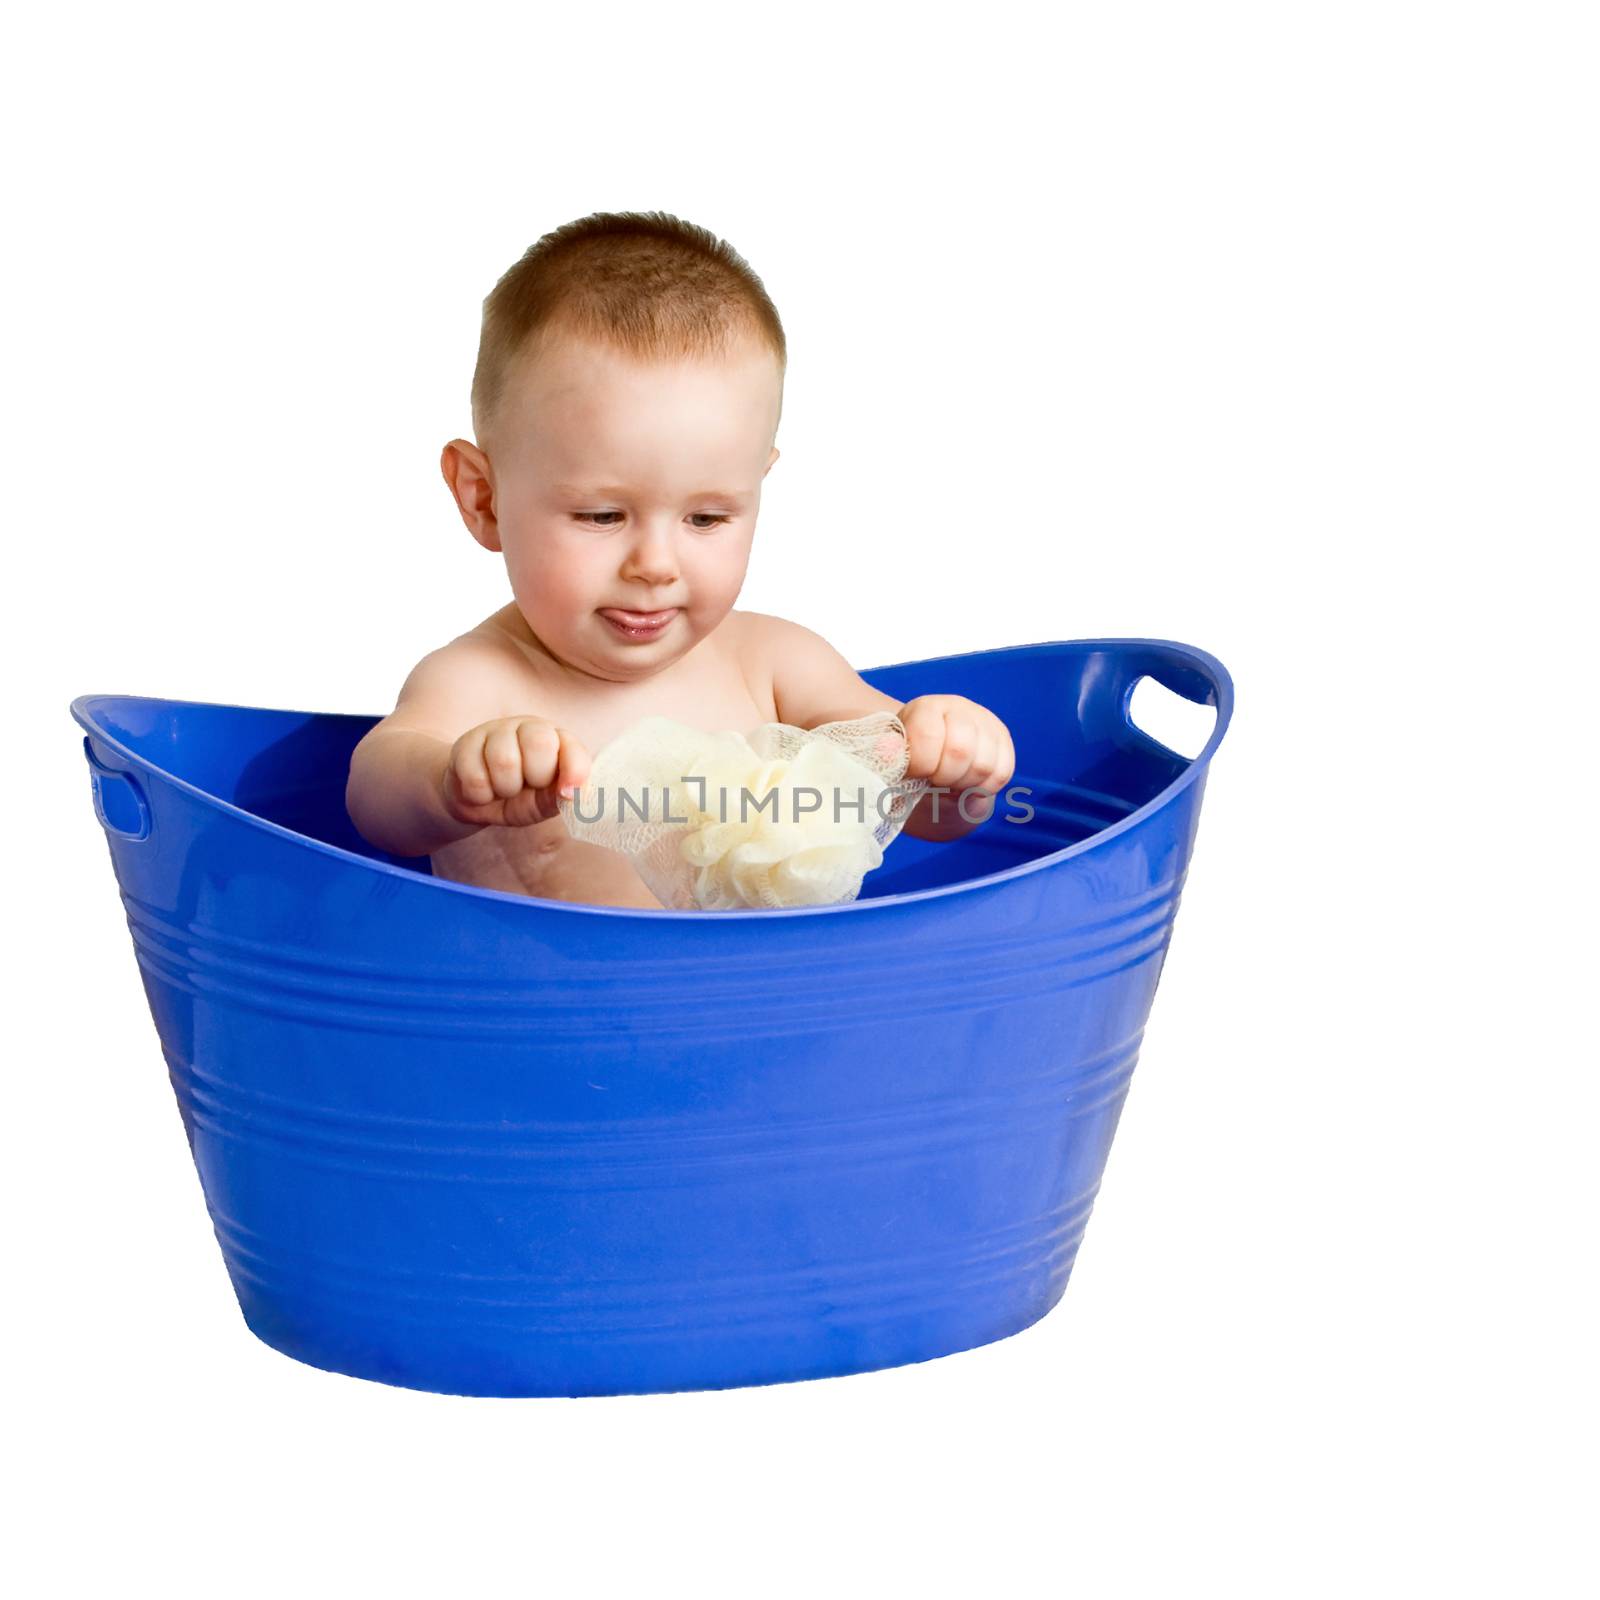 A baby boy playing in a plastic laundry basket. Isolated on white with a clipping path for easy removal